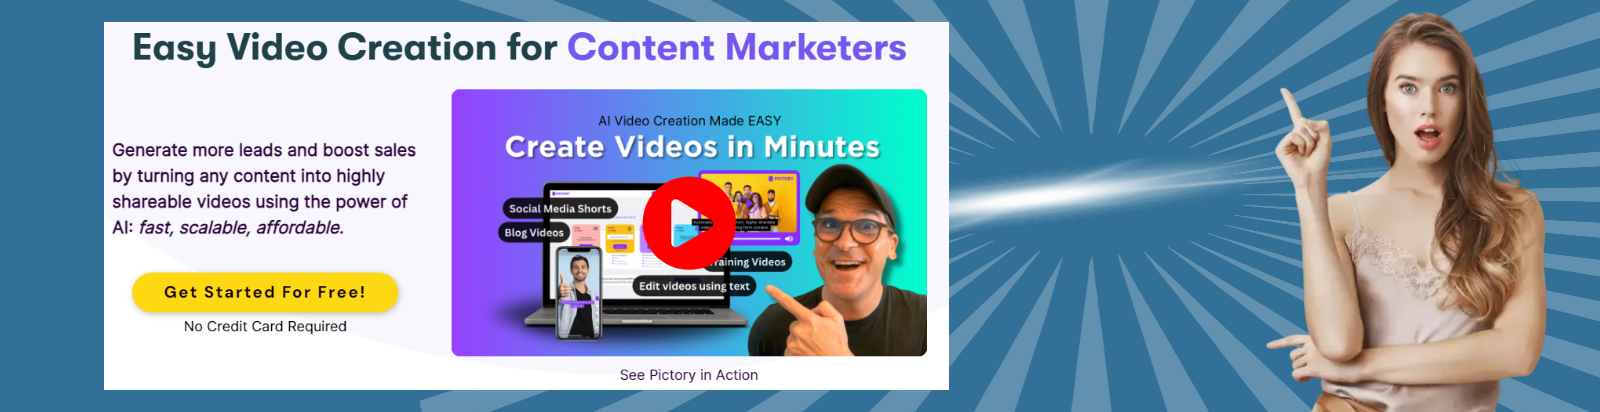 Easy Video Creation for Content Marketers